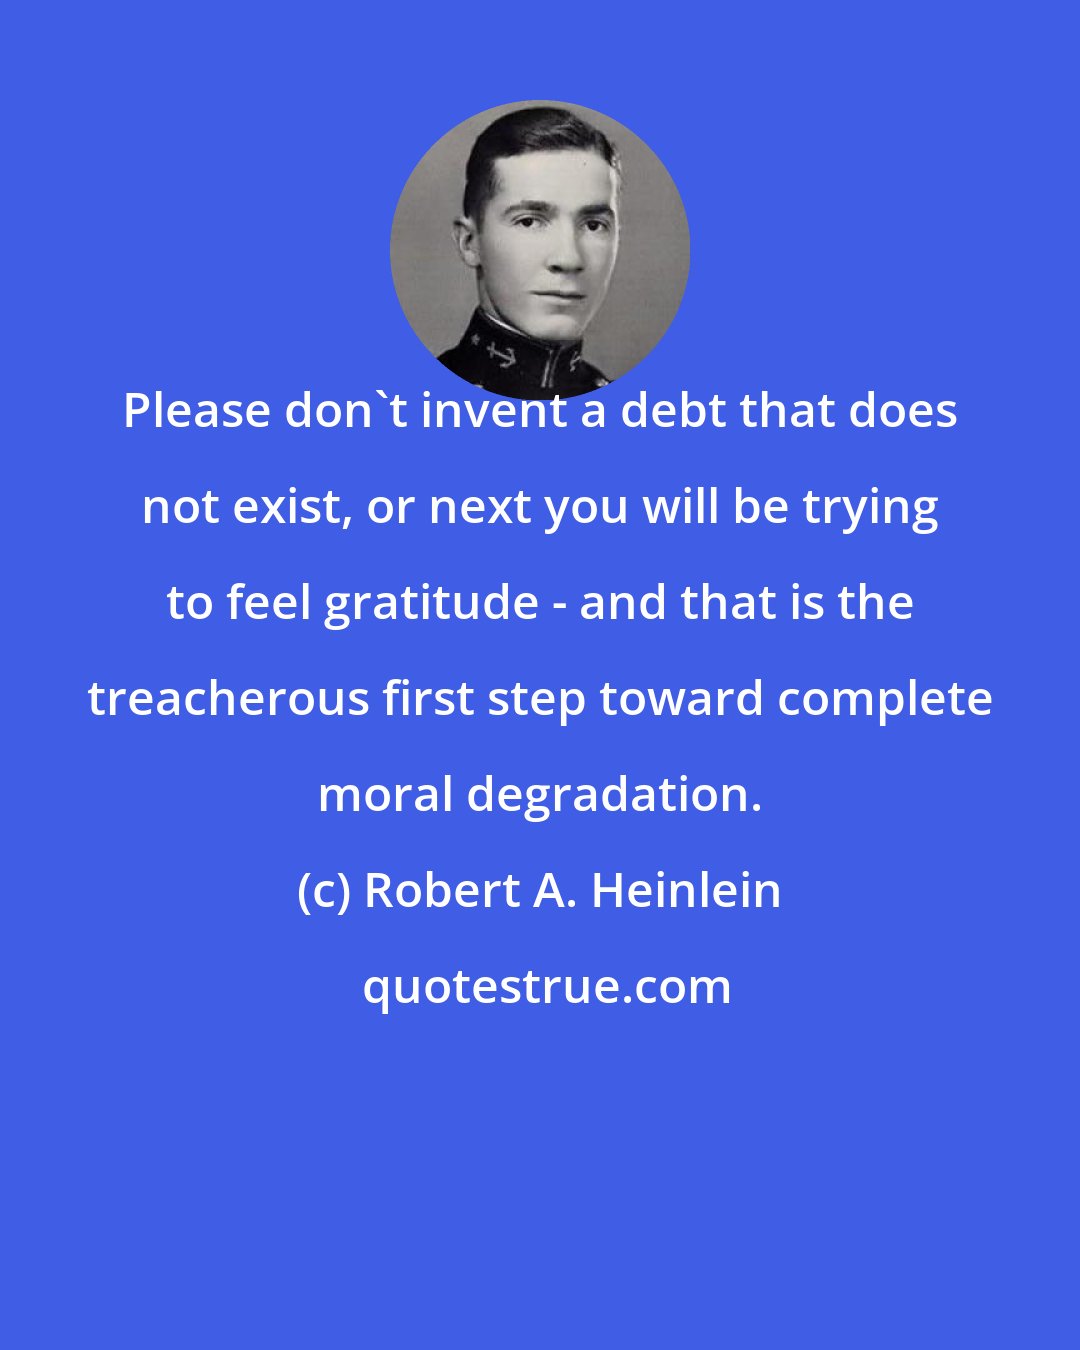 Robert A. Heinlein: Please don't invent a debt that does not exist, or next you will be trying to feel gratitude - and that is the treacherous first step toward complete moral degradation.